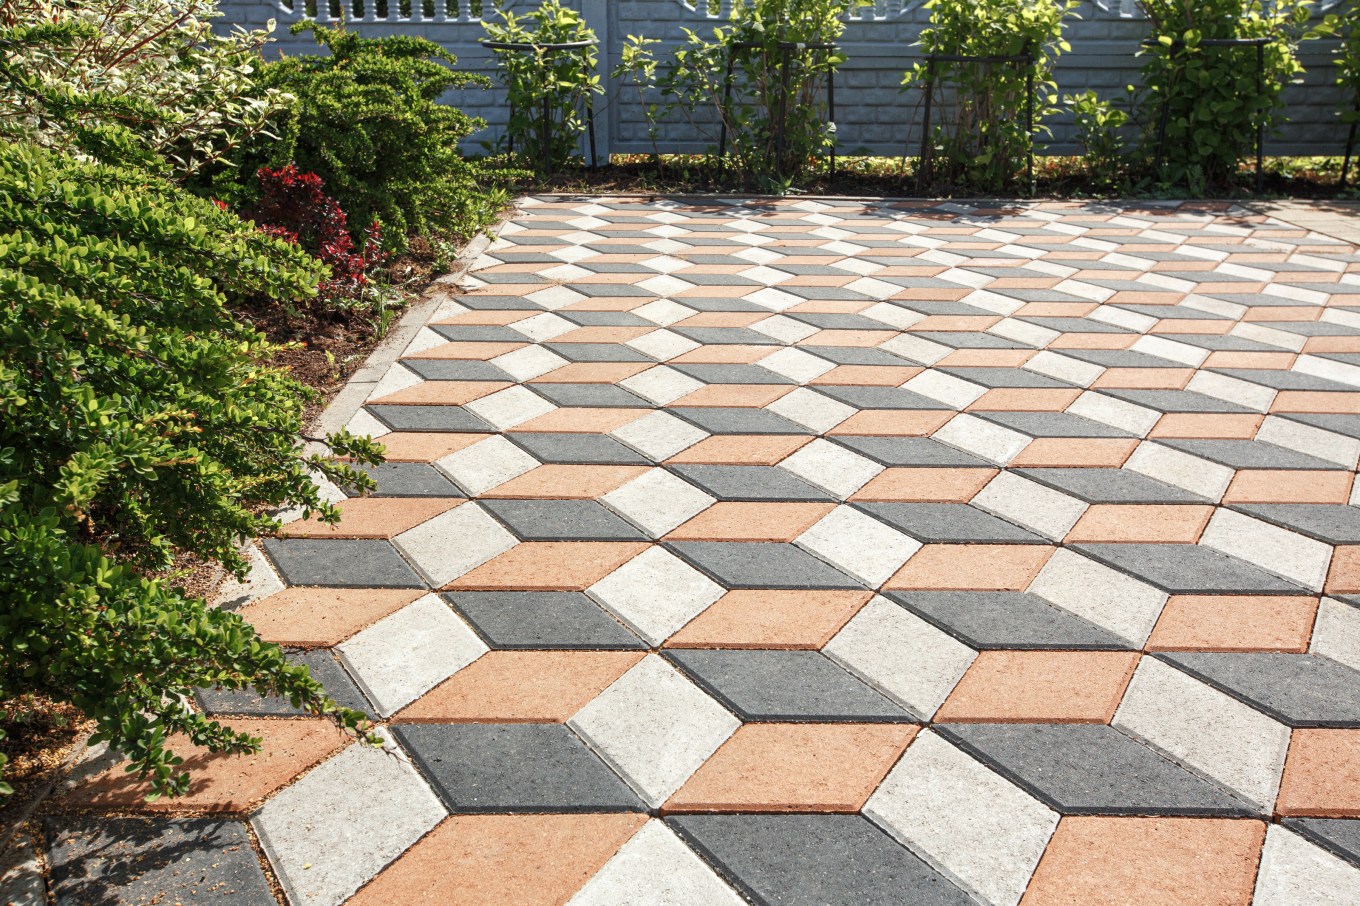 Concrete patio made of diamond-shaped paving tiles in alternating colors.